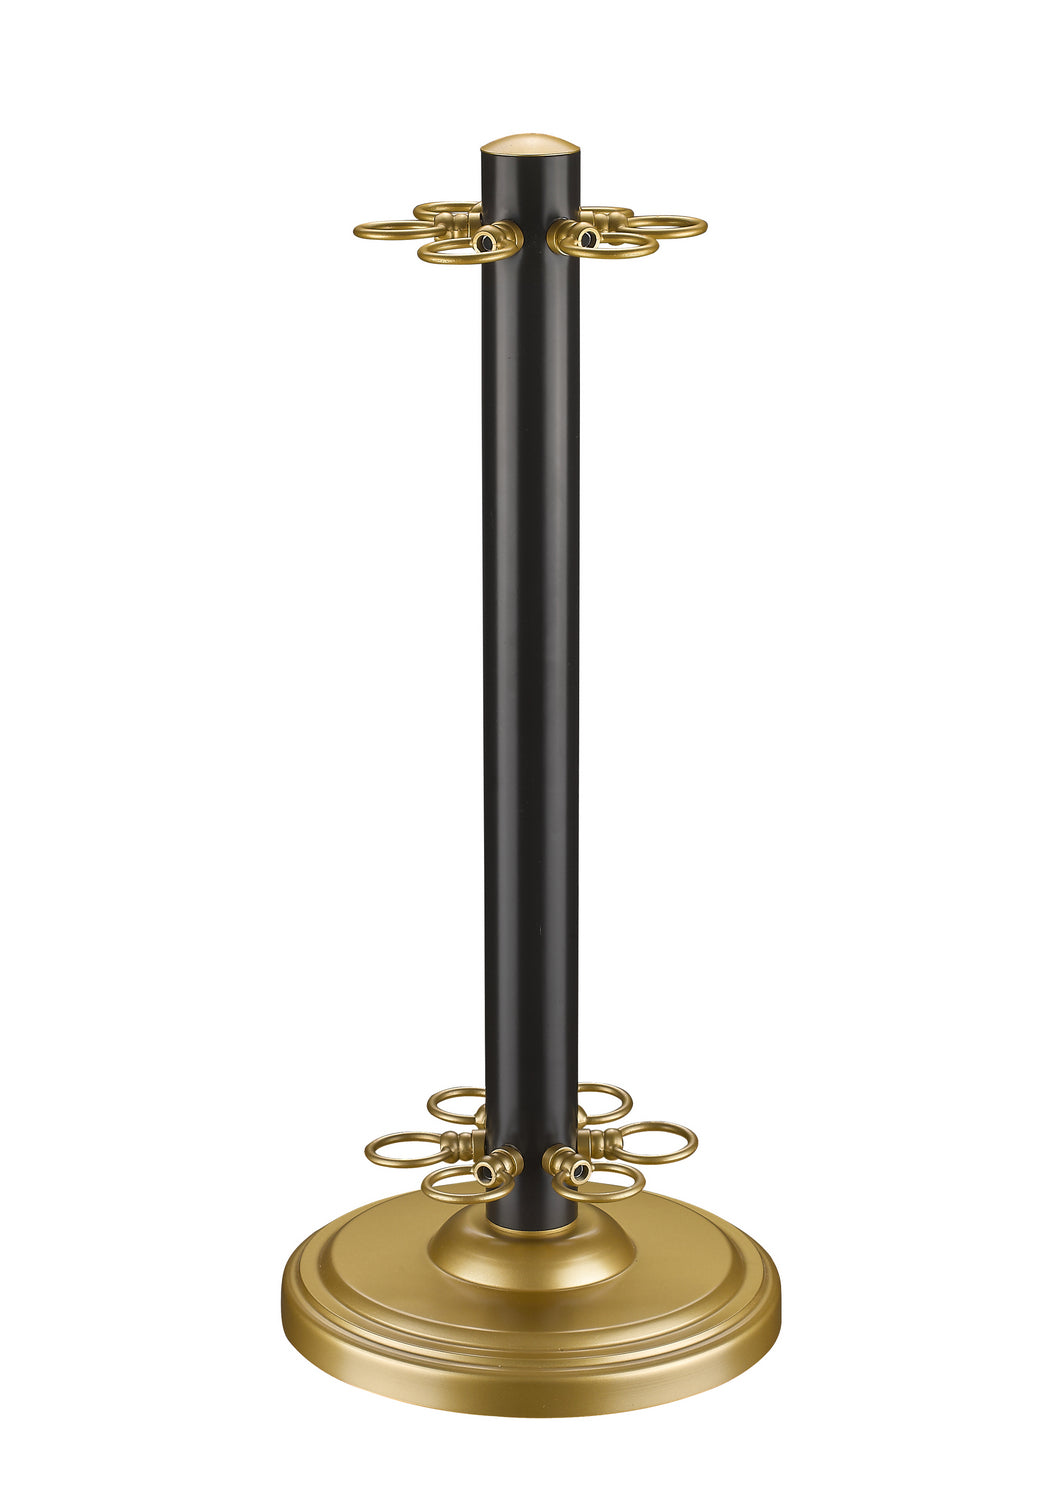 Z-Lite Canada - Cue Stand - Players - Bronze / Satin Gold- Union Lighting Luminaires Decor